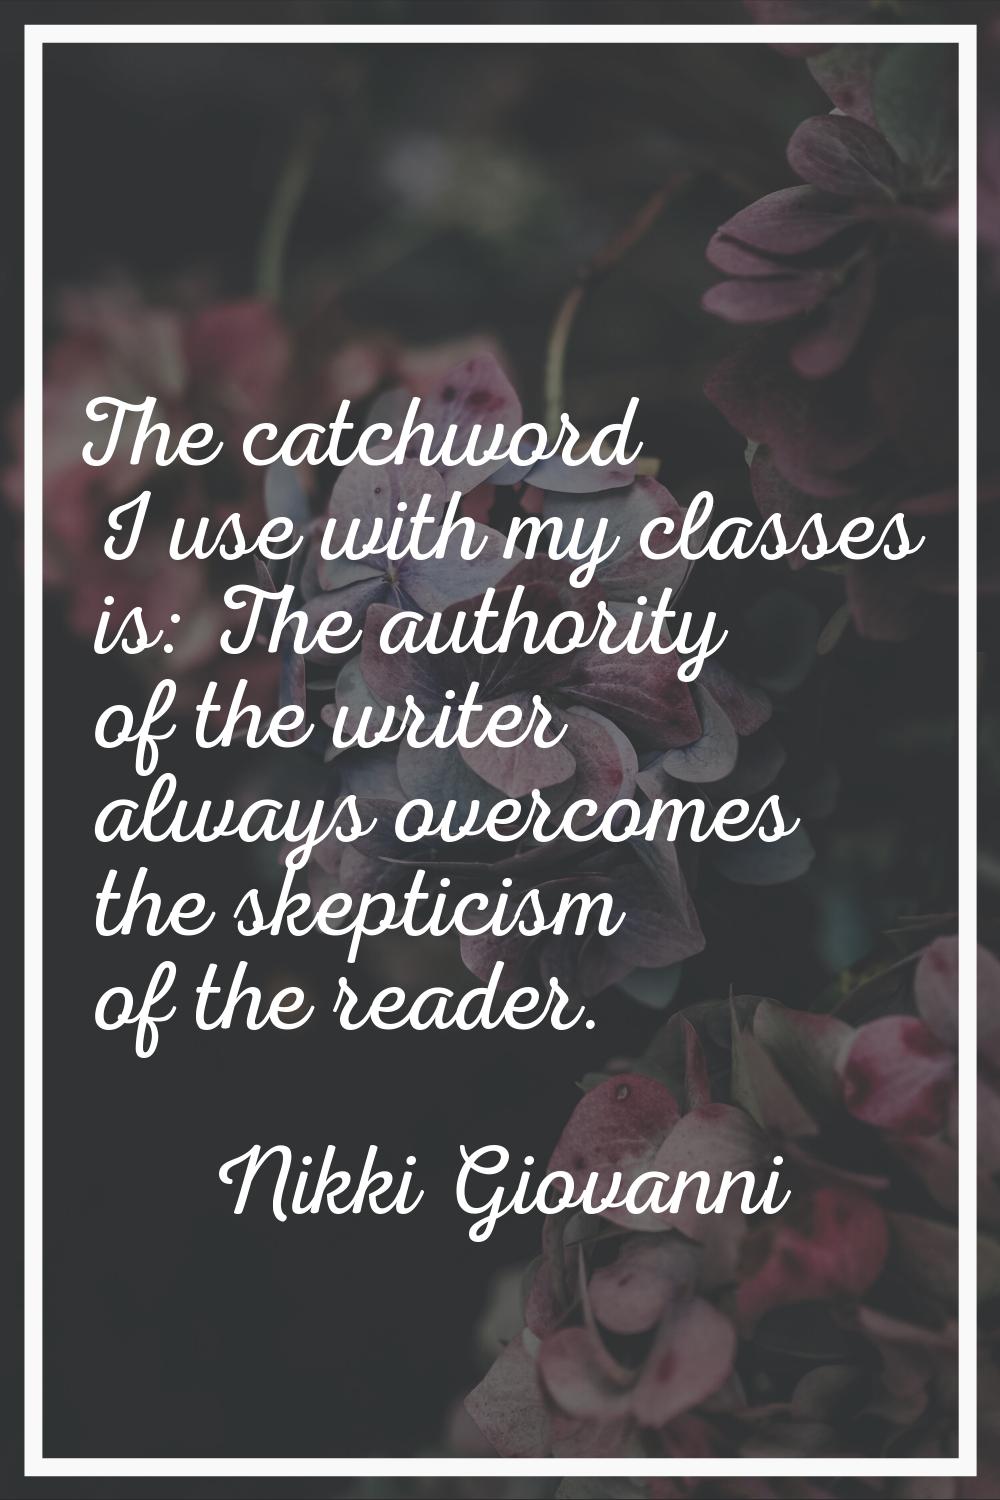 The catchword I use with my classes is: The authority of the writer always overcomes the skepticism